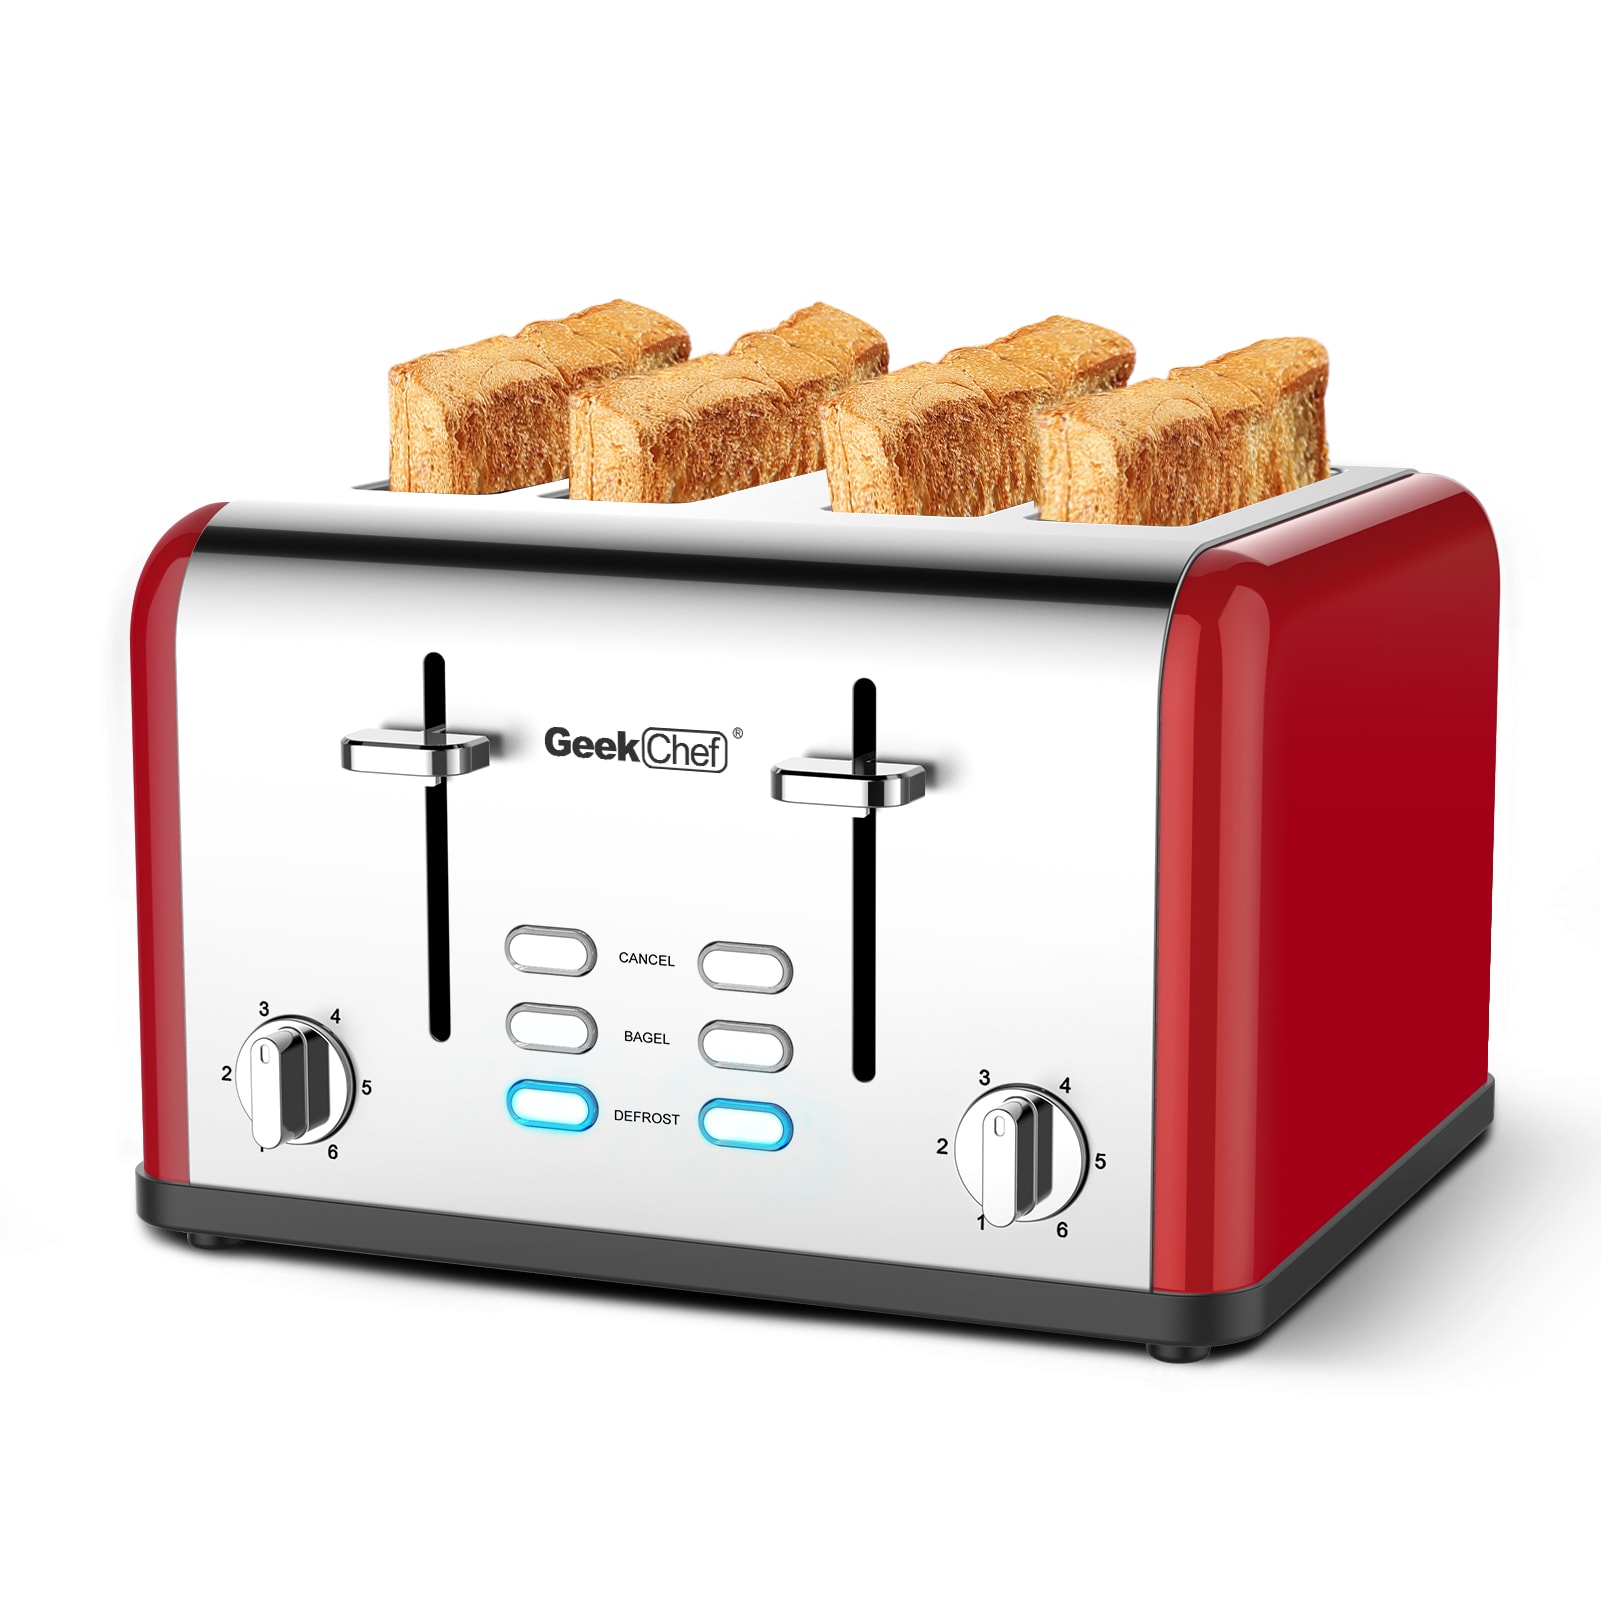 GZMR Red 4 Slice Toaster with 6 Shade Settings, Automatic Shut-Off | ETL Safety Listed | Stainless Steel | Slide-Out Crumb Tray | Bagel & Defrost